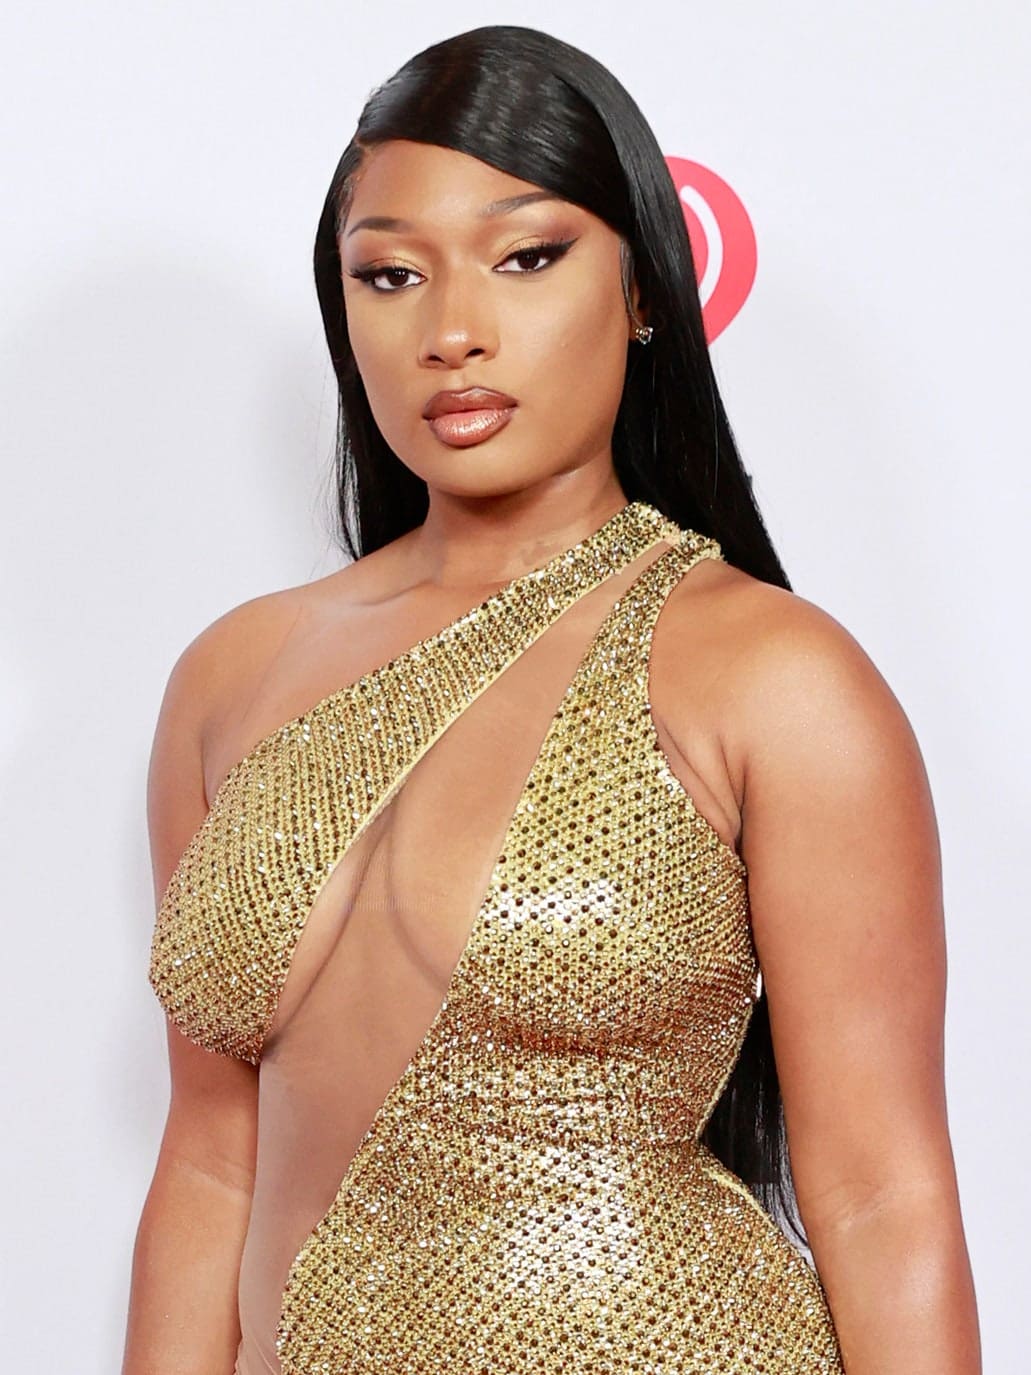 ”megan-thee-stallion-mesmerizes-fans-with-her-new-latest-horror-pics-ahead-of-halloween”